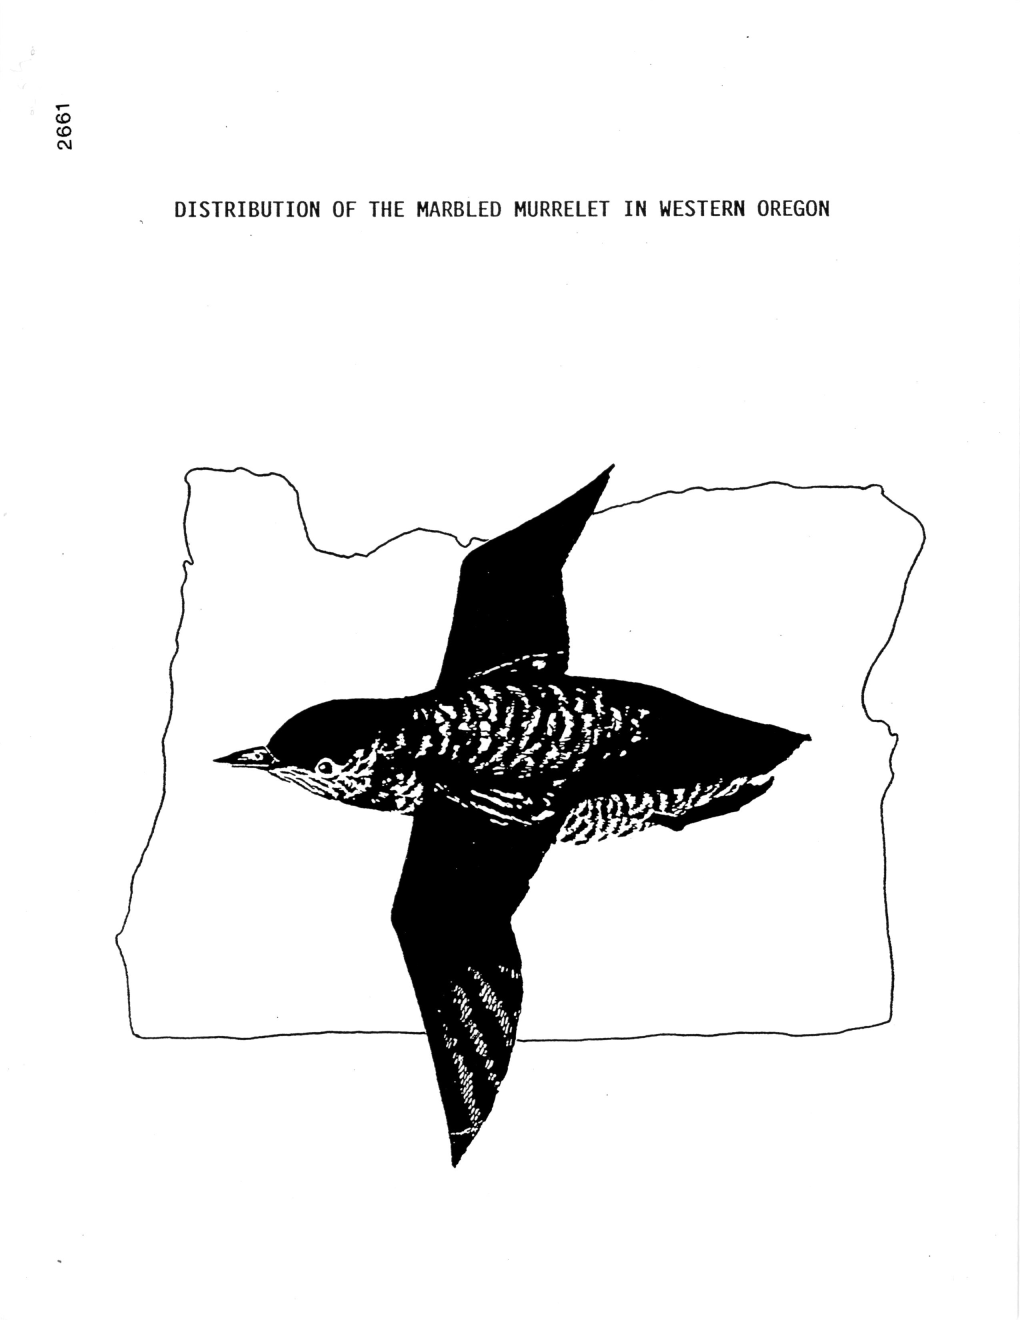 Distribution of the Marbled Murrelet in Western Oregon